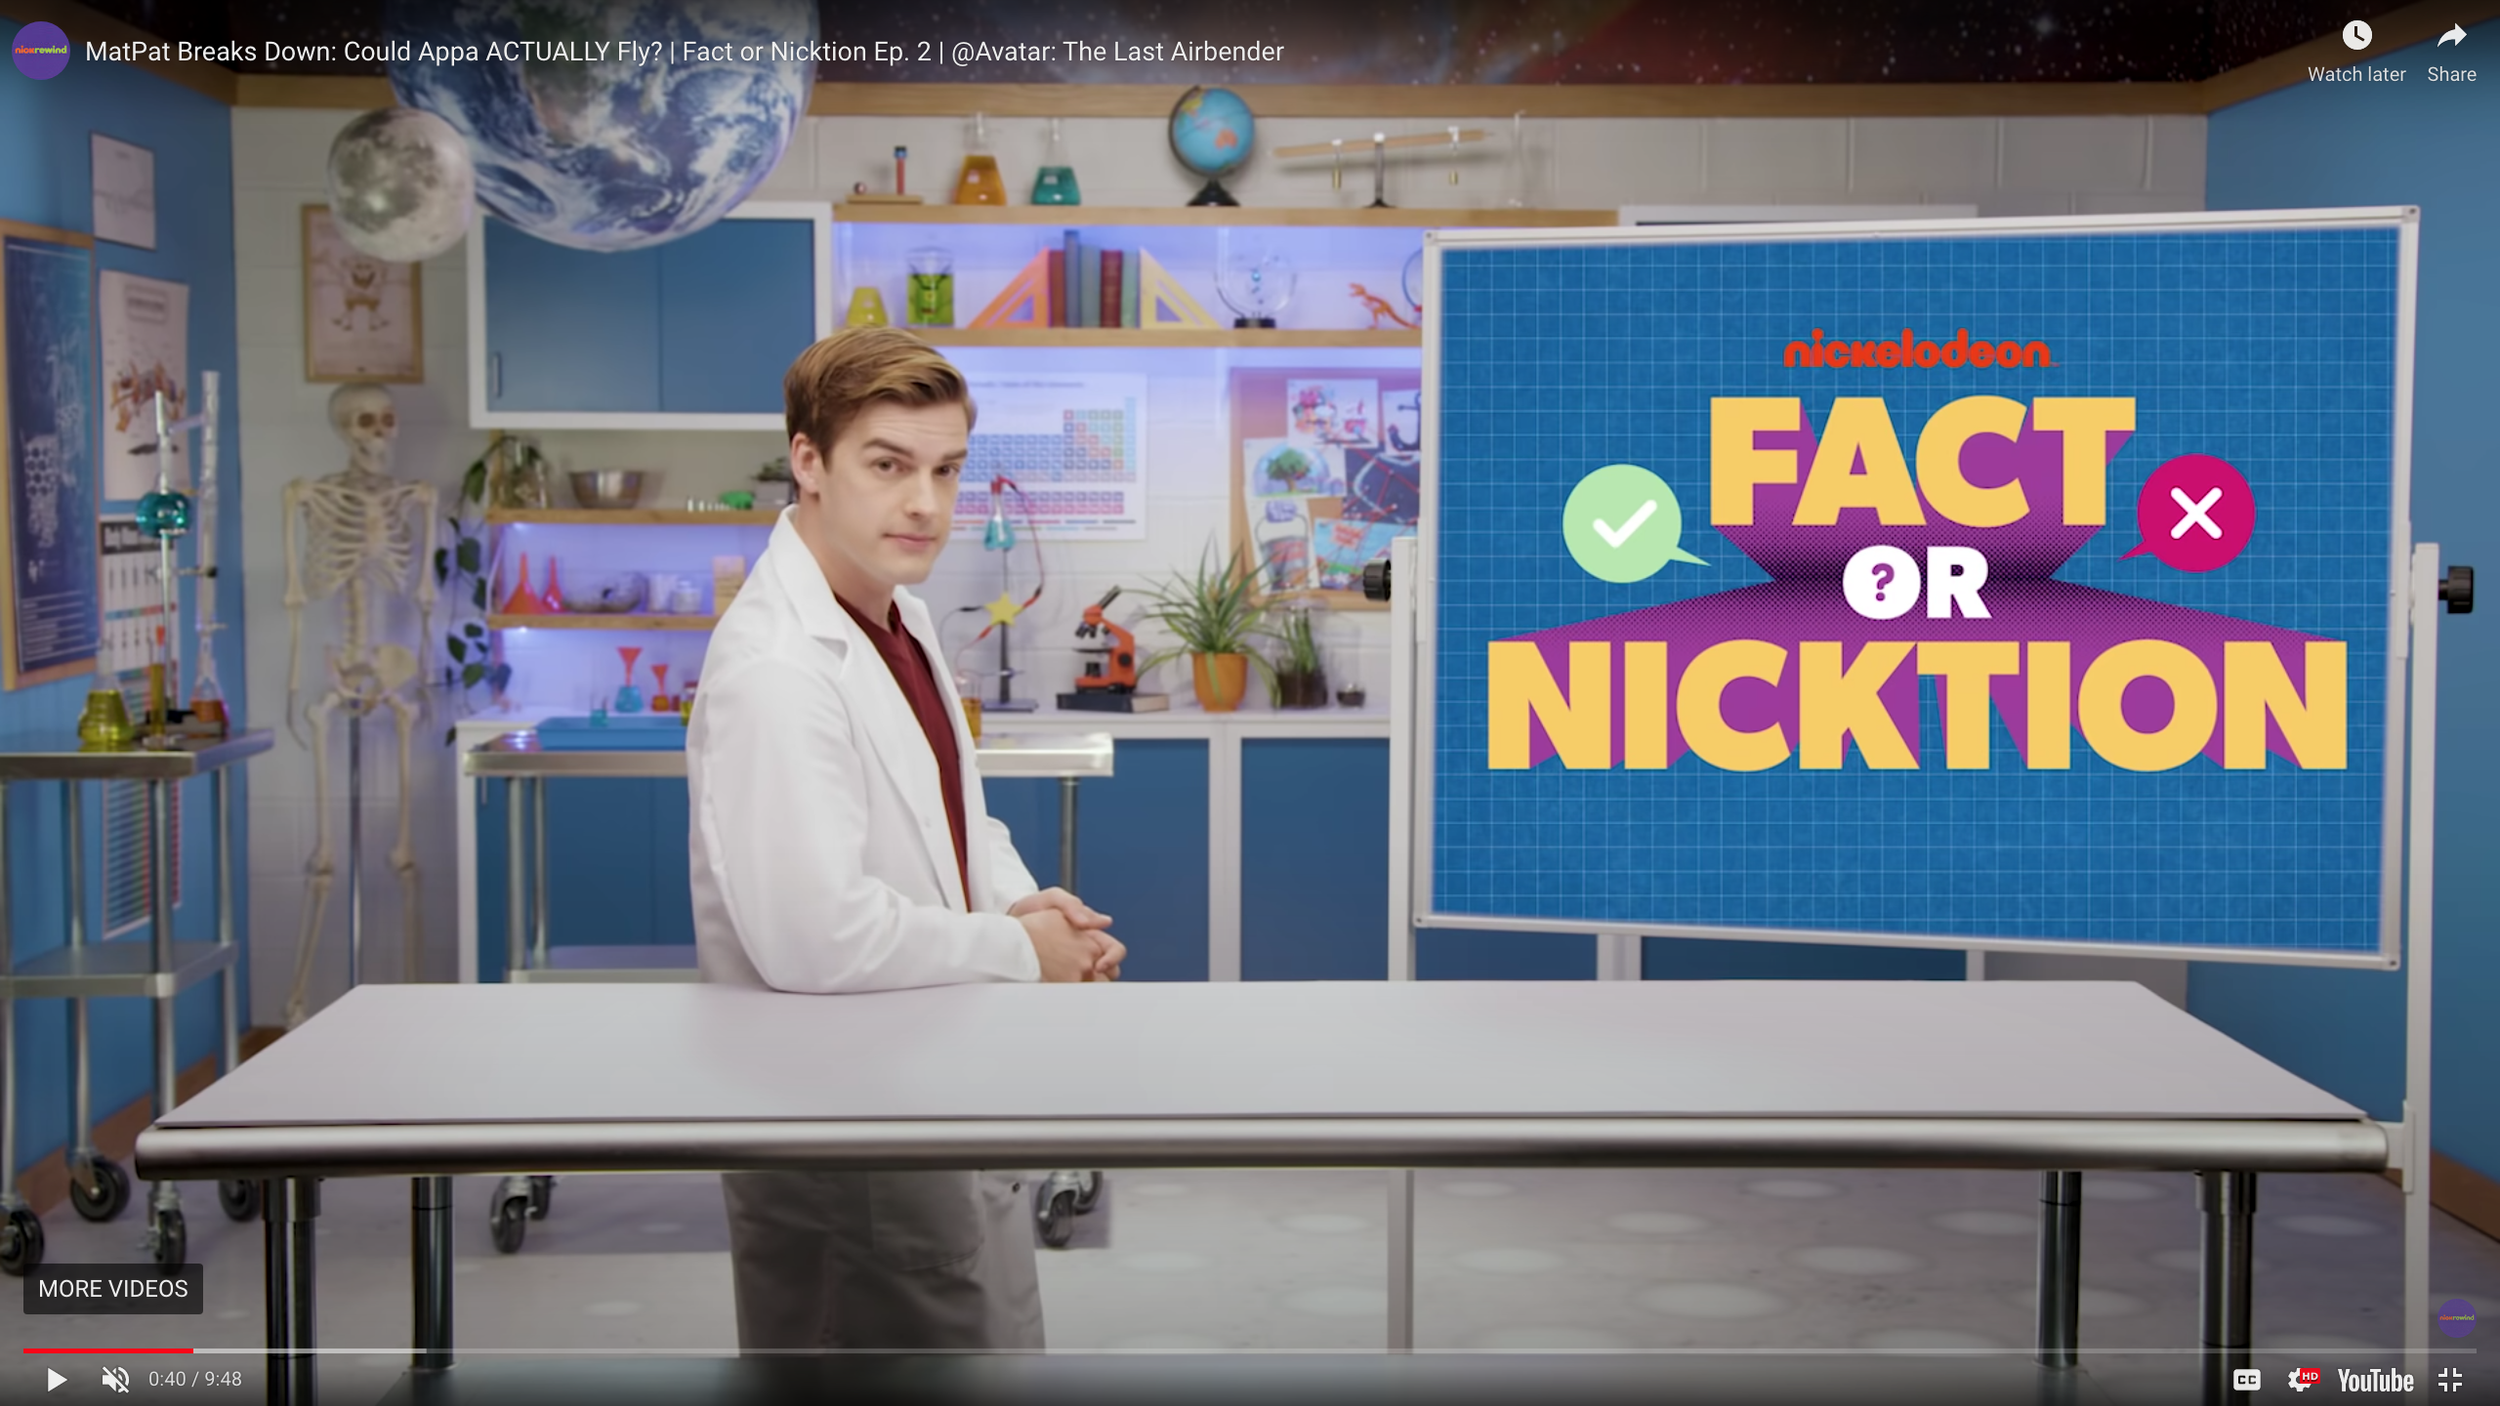 &nbsp;Nickelodeon’s Fact or Nicktion